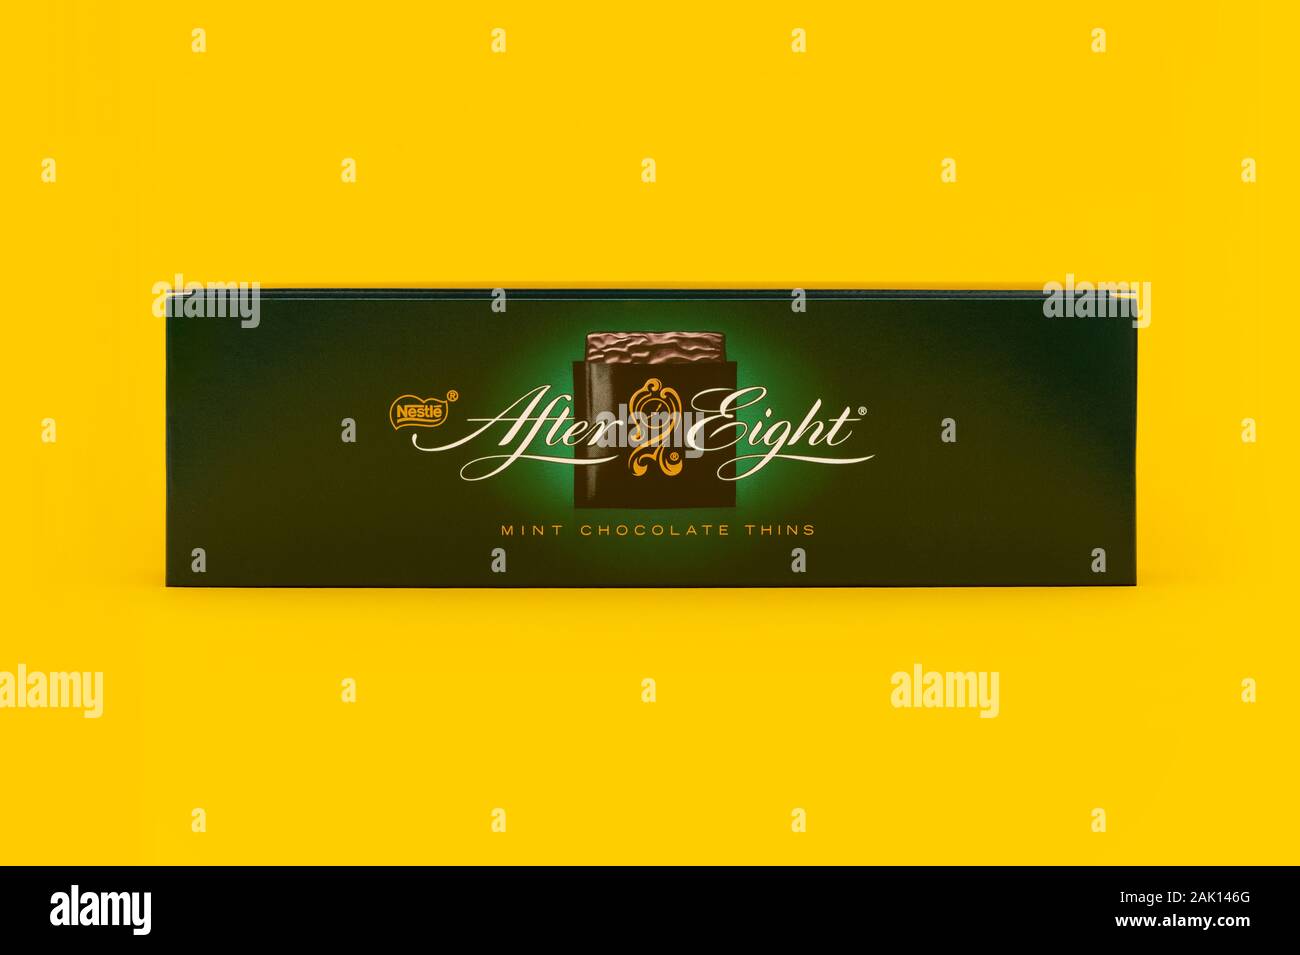 A box of Nestle After Eight chocolates shot on a yellow background. Stock Photo